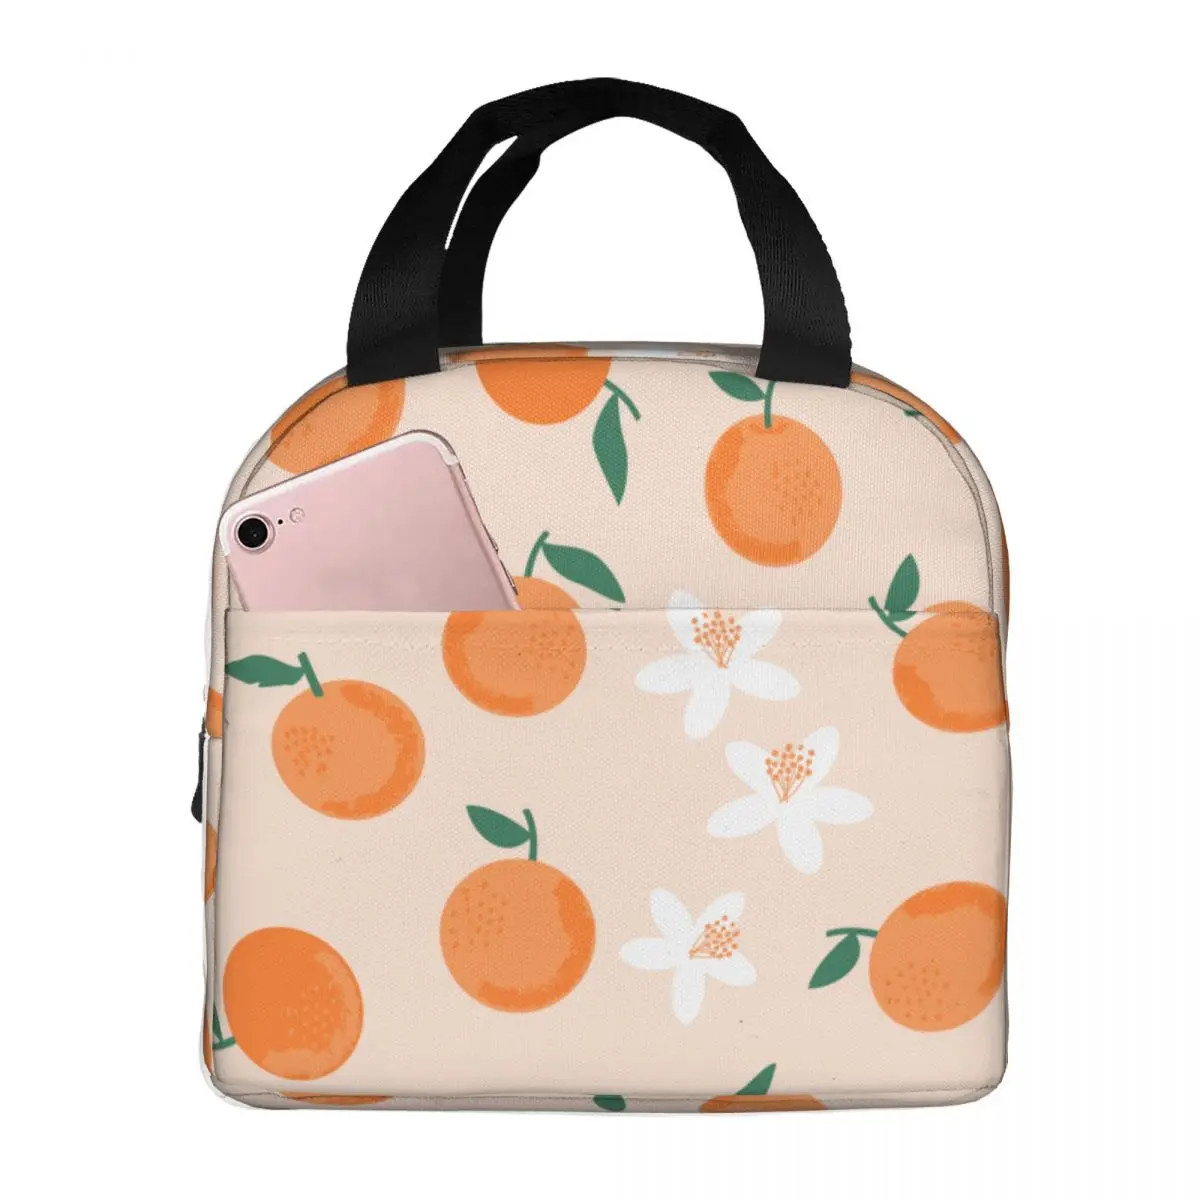 Lunch Bag for Women Kids Orange Flower Floral Thermal Cooler Portable Picnic School Fruit Canvas Lunch Box Food Storage Bags